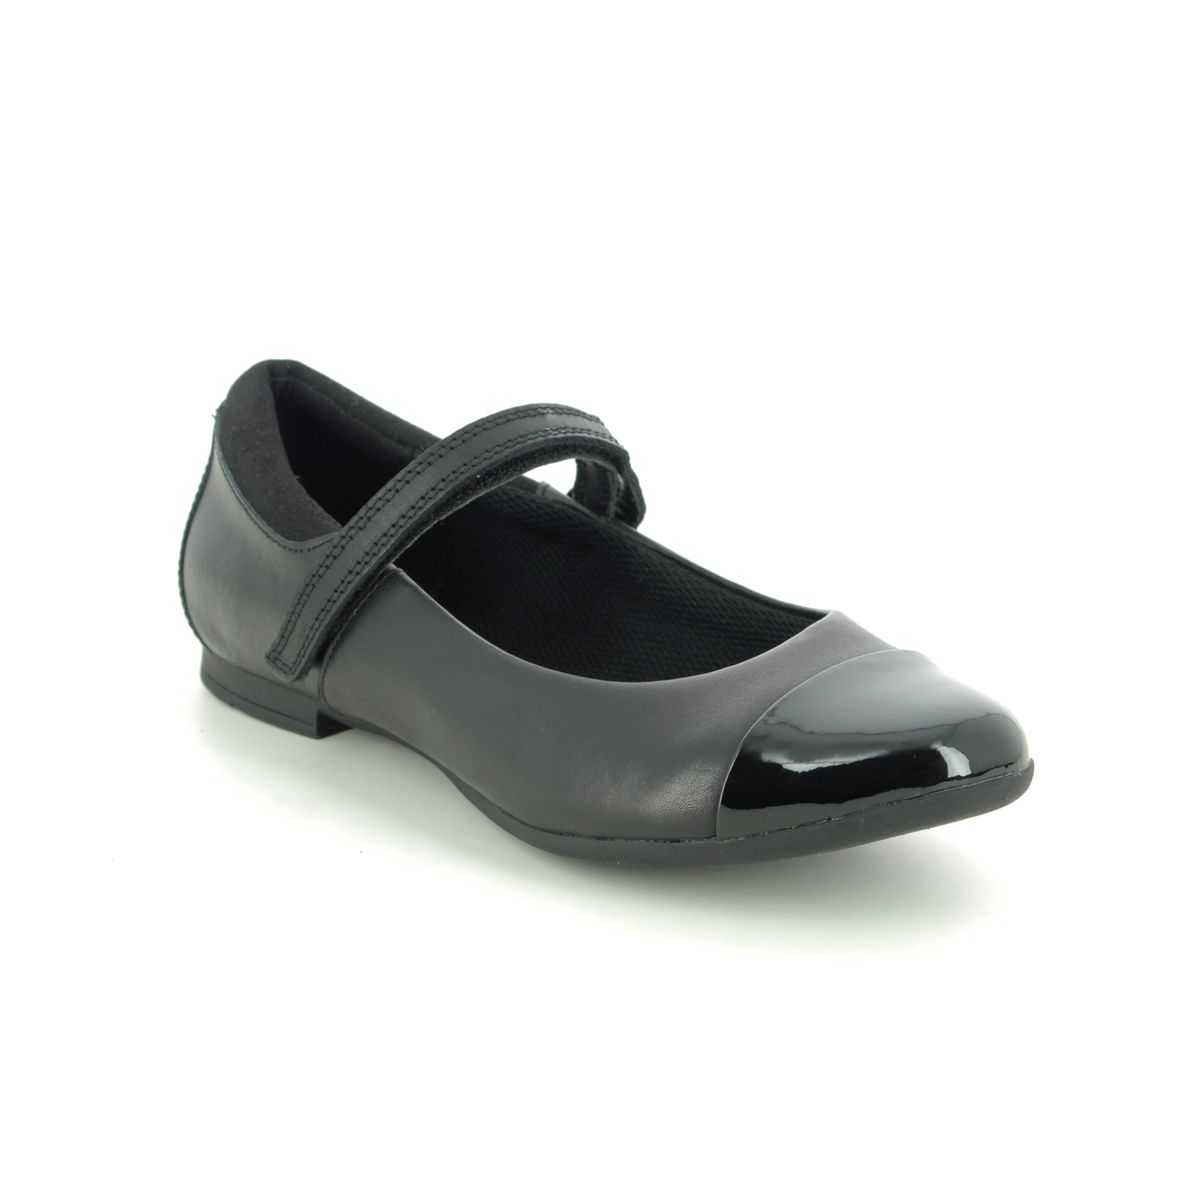 Clarks Scala Gem Y Black Leather Kids Girls School Shoes 495575E In Size 5.5 In Plain Black Leather E Width Fitting Narrow Fit For School For kids